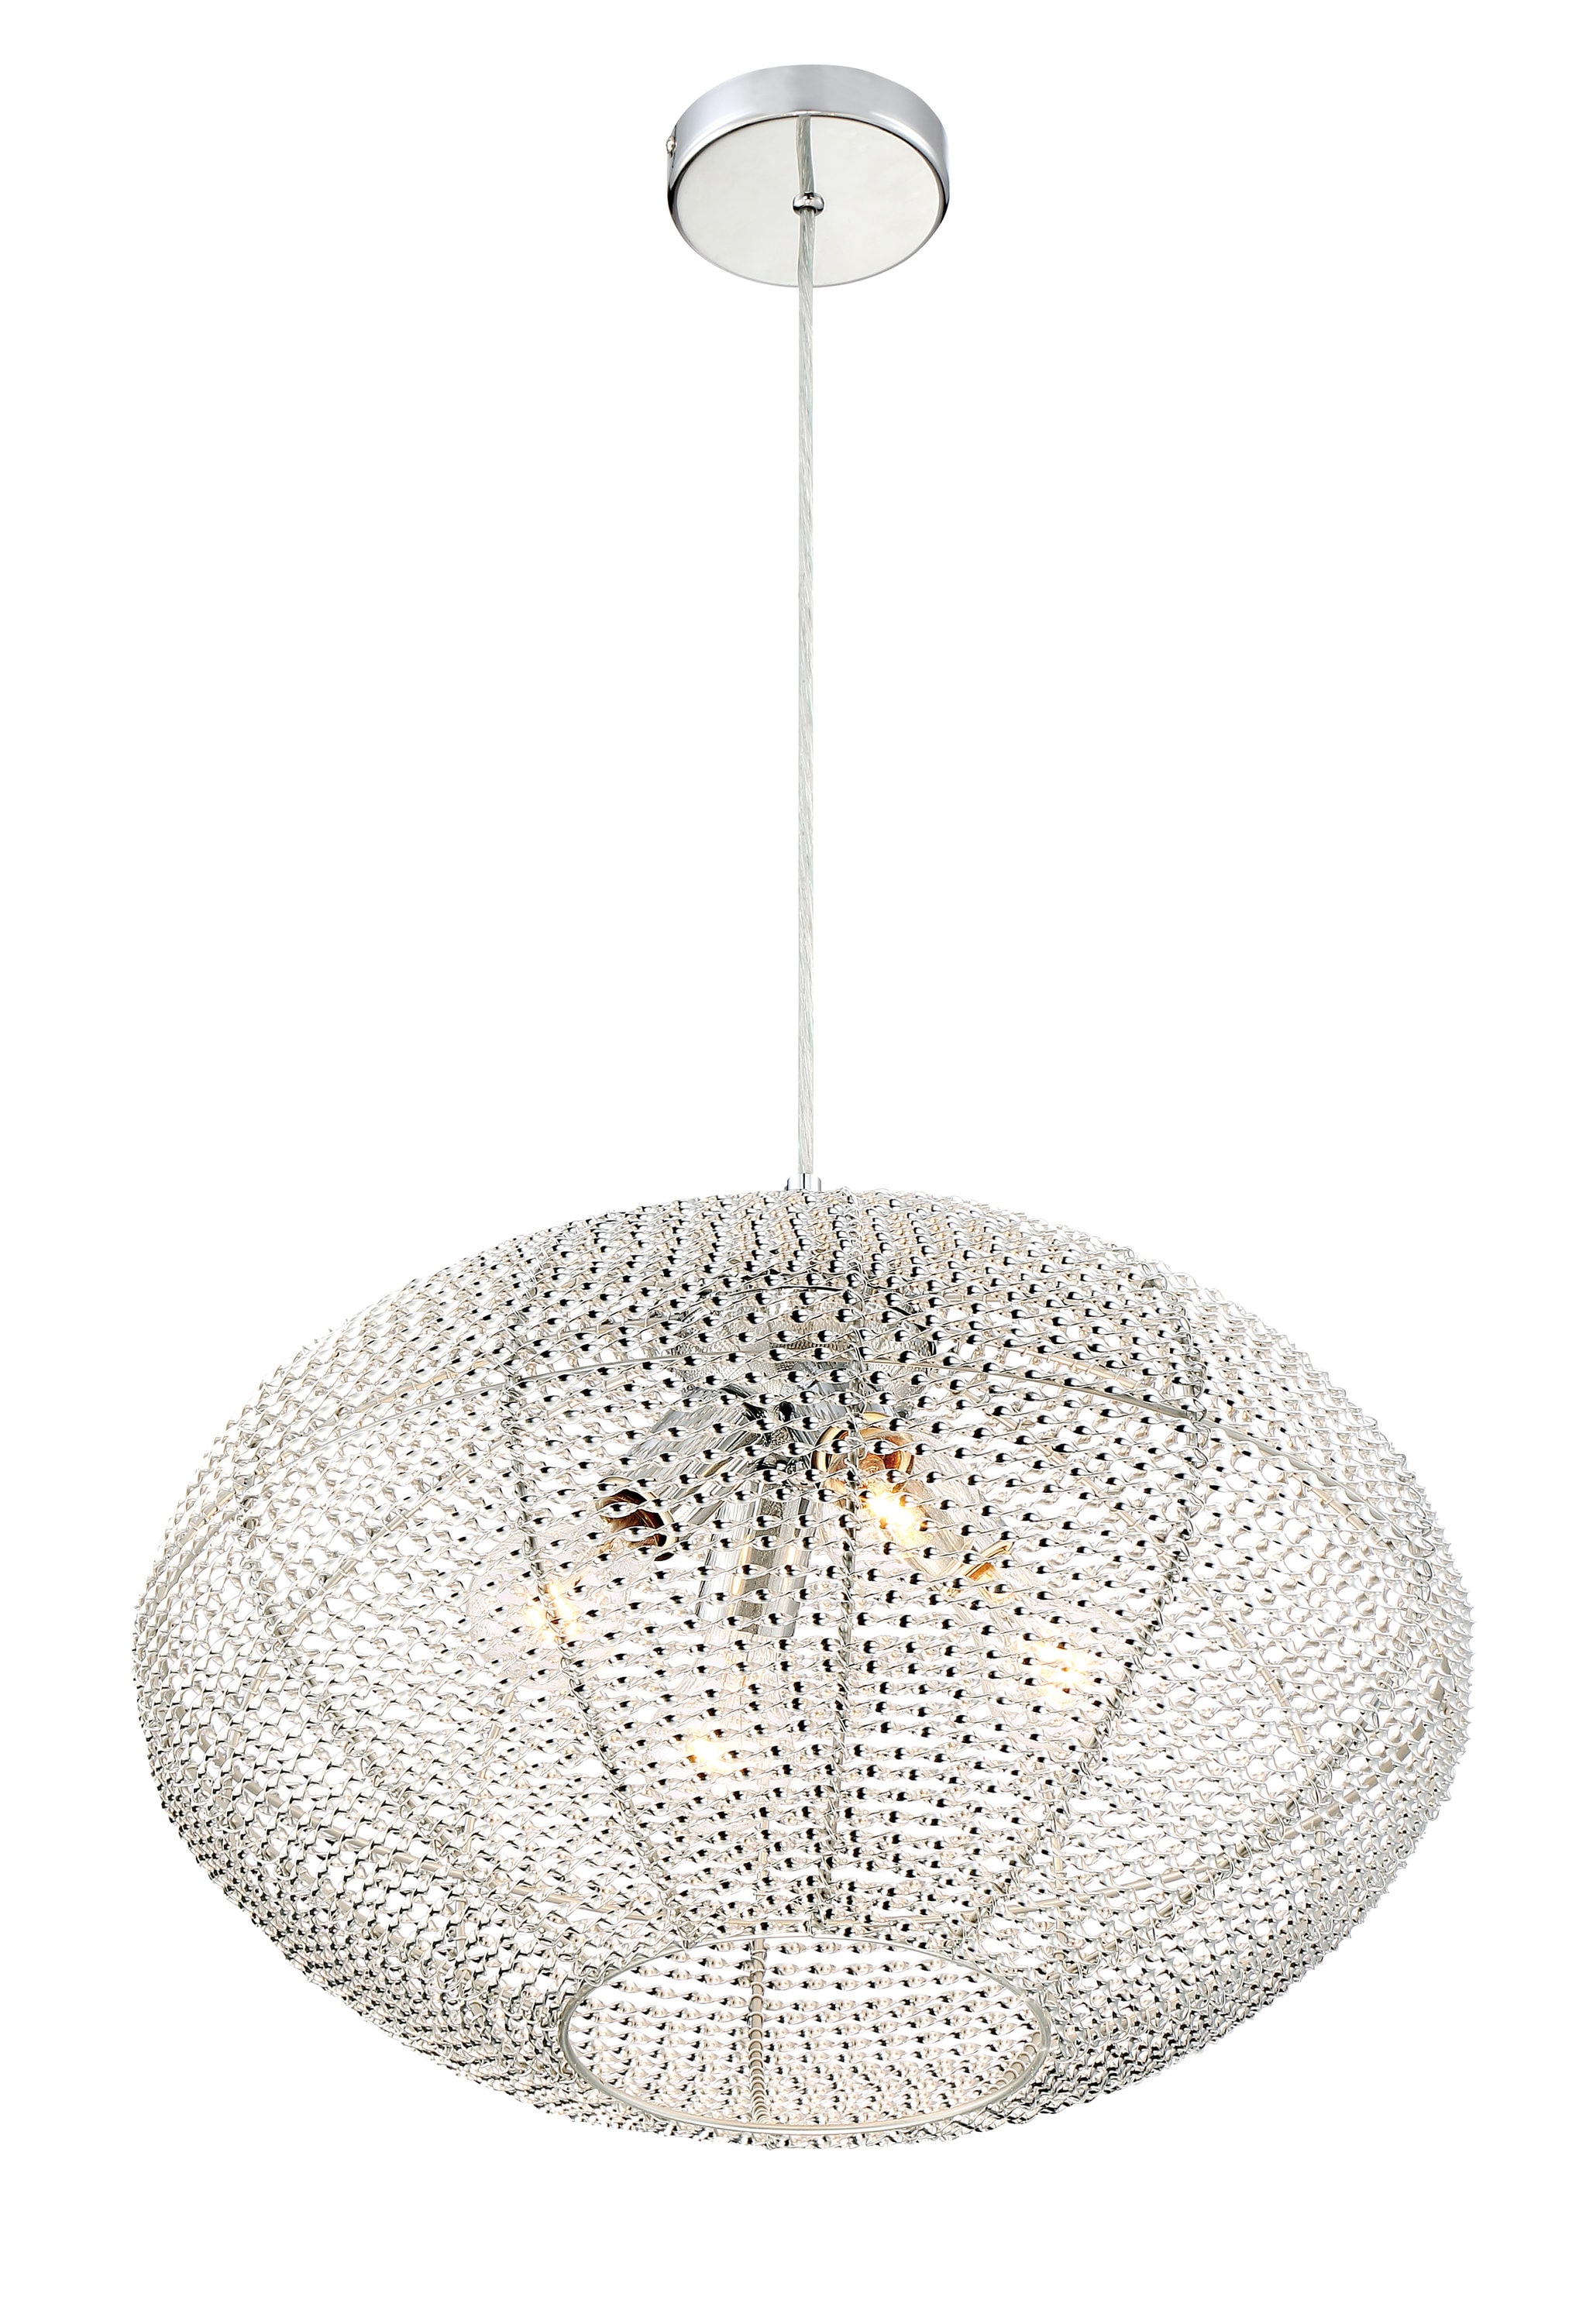 Quoizel Tango 4-Light Polished Pendant department Light Pendant Lighting Dome Chrome in at the Transitional Hanging